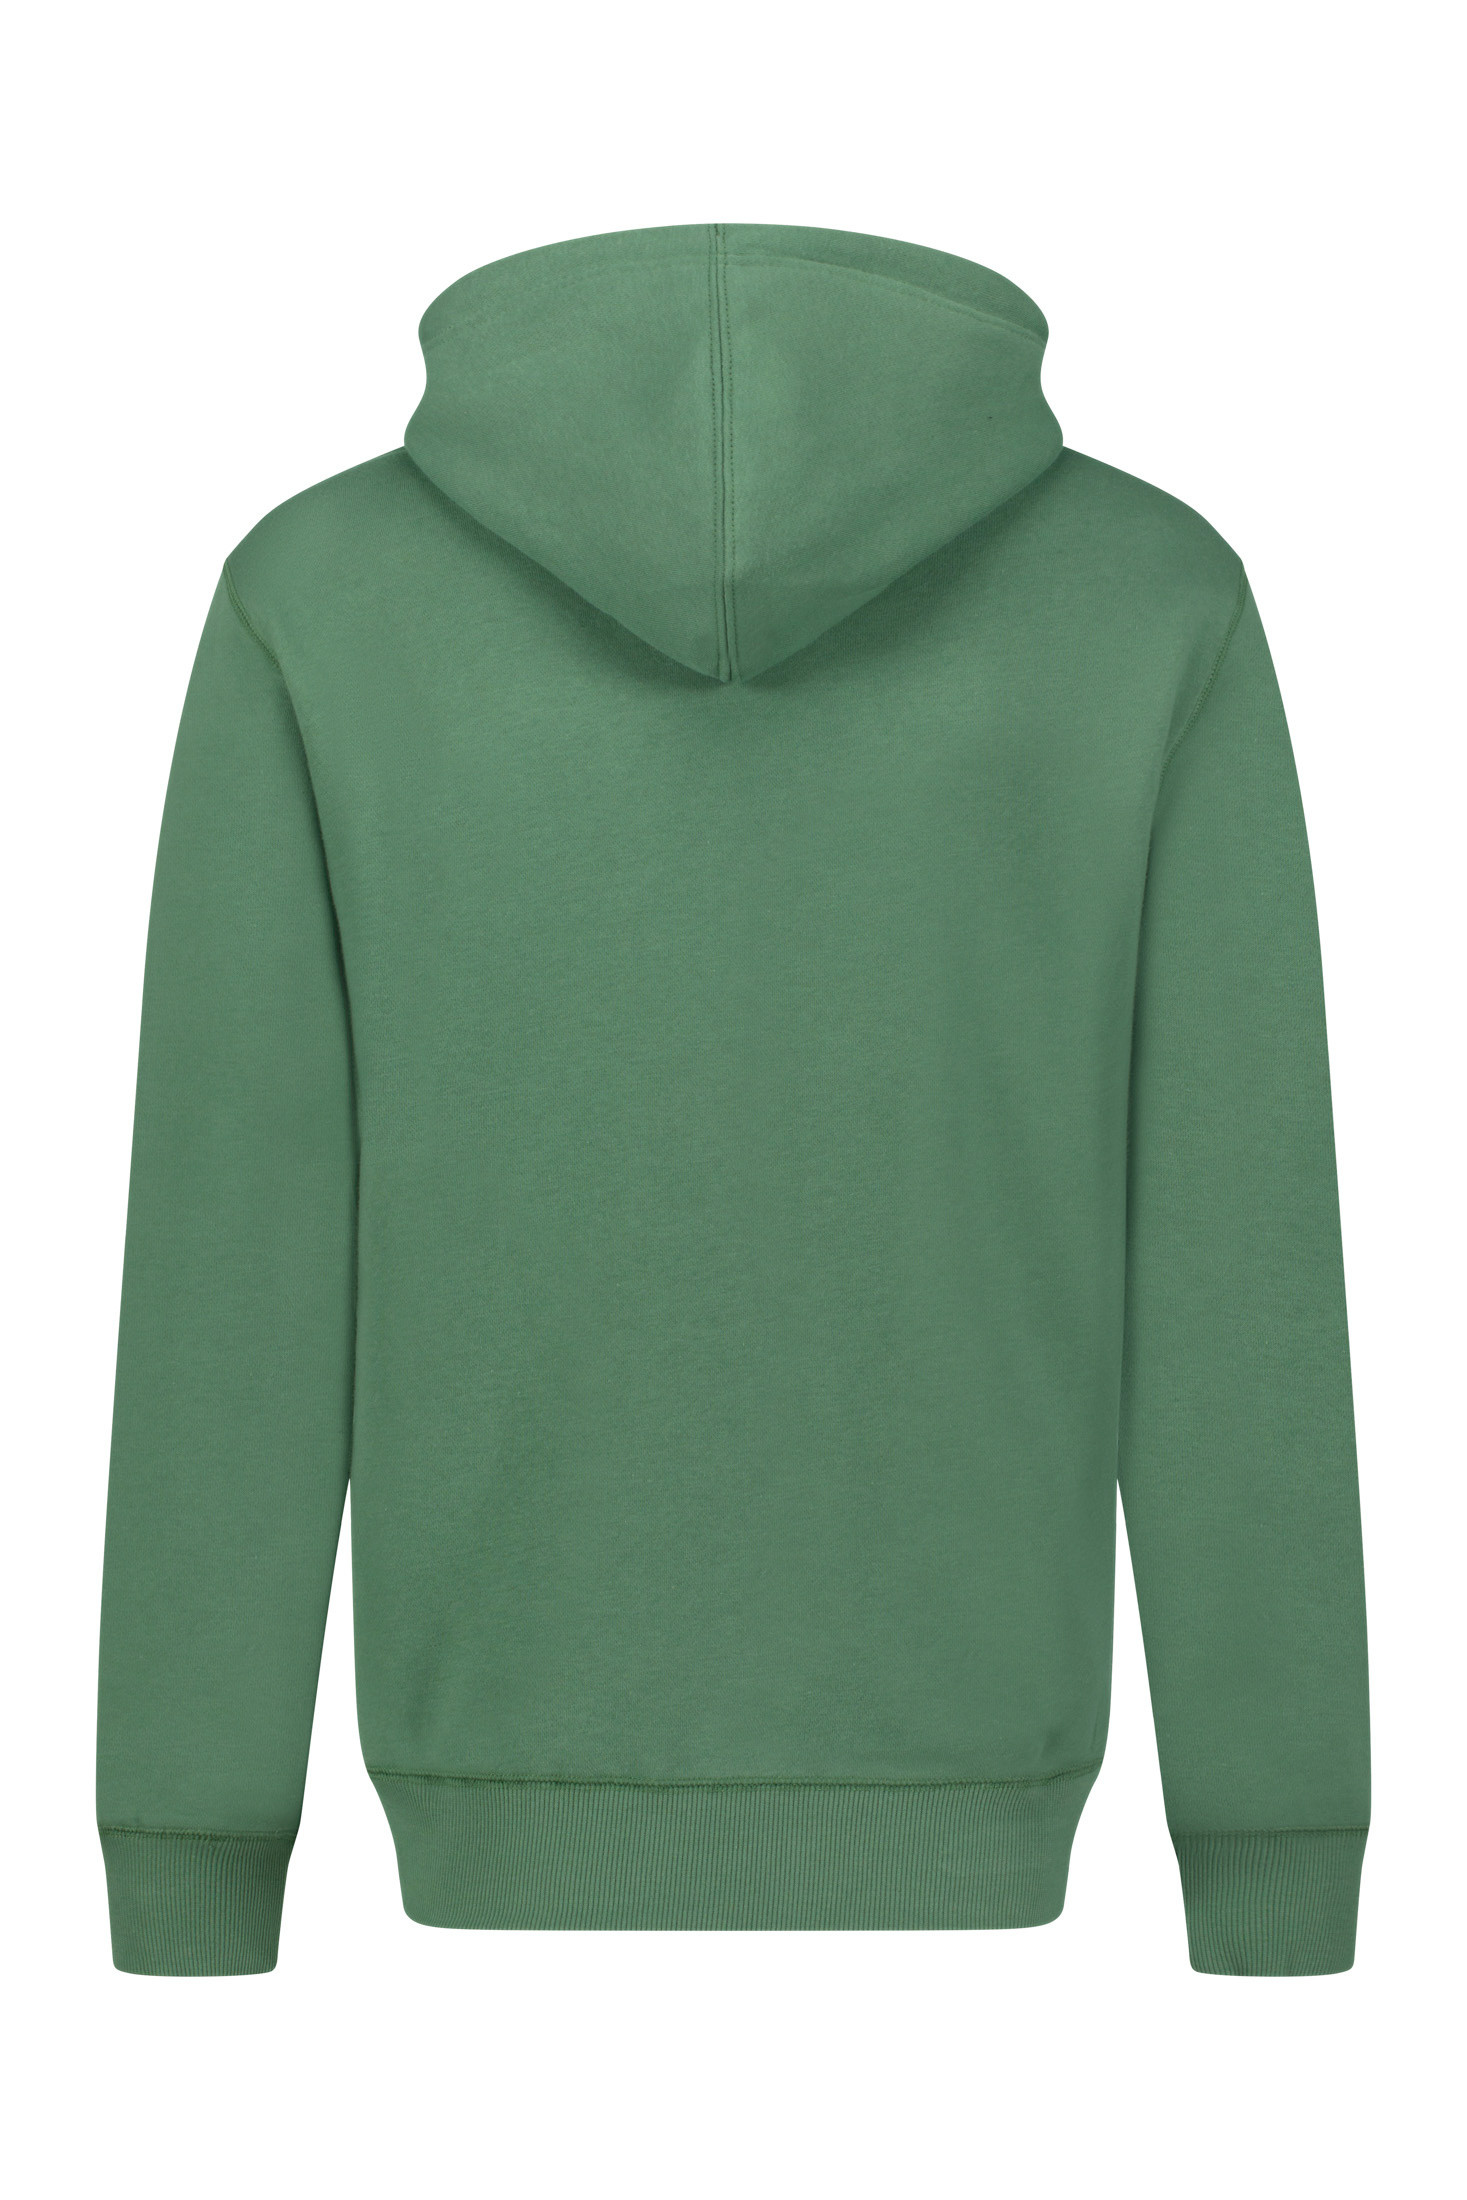 Russell Athletic - Hoodie, Light Green, large image number 1